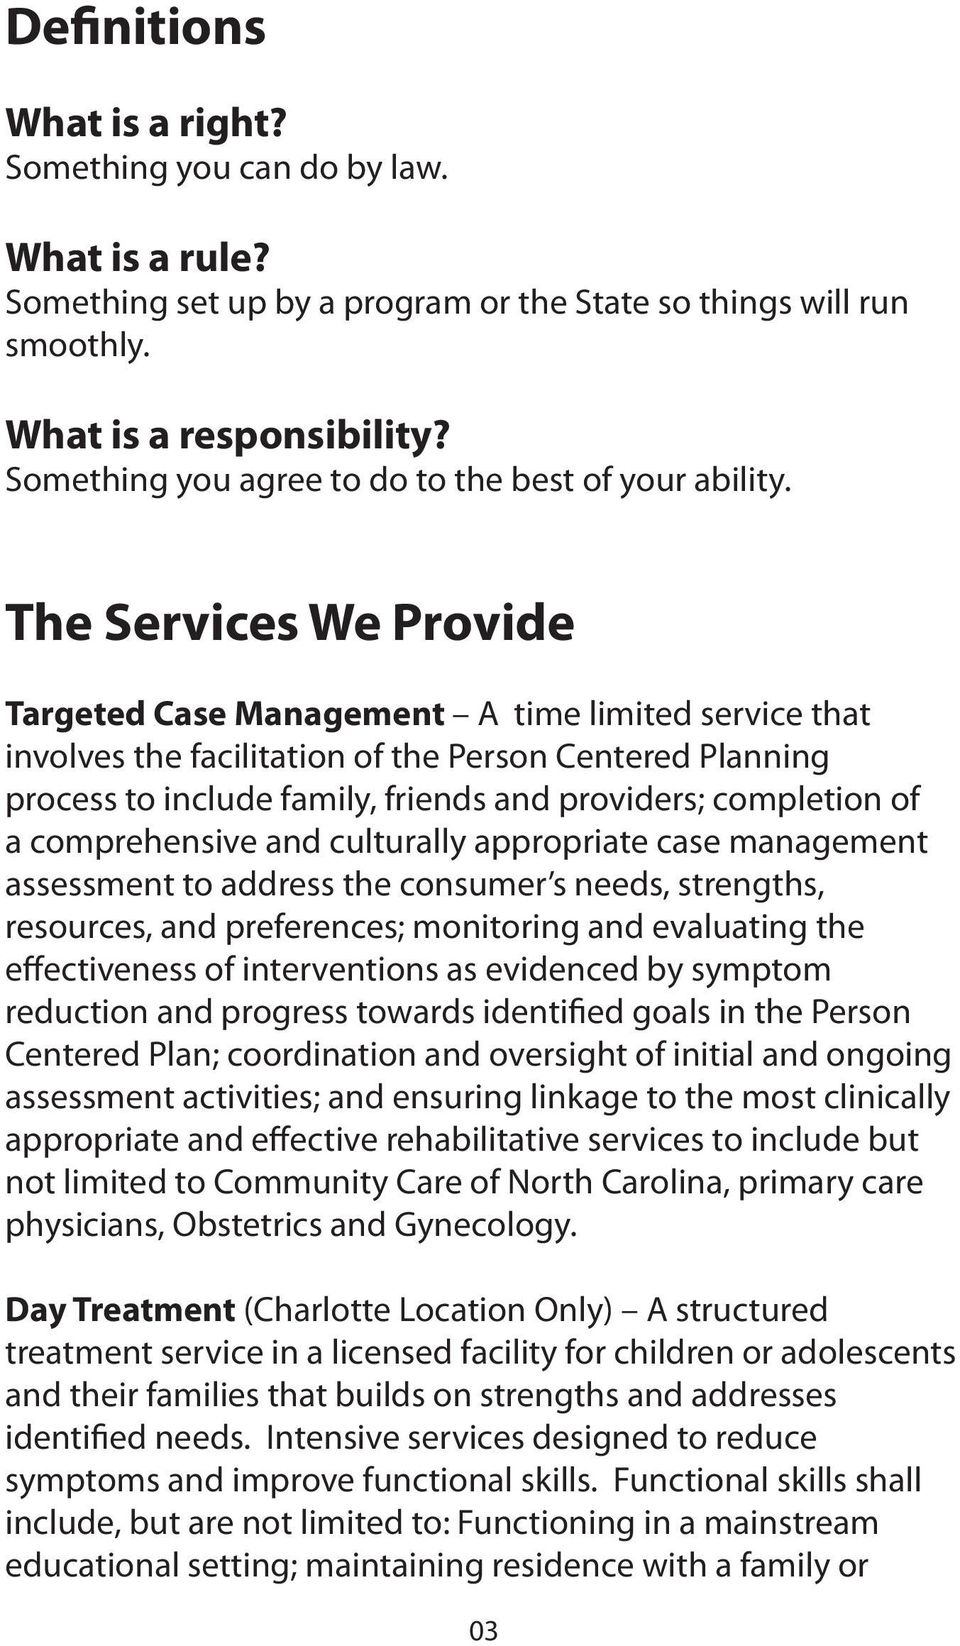 The Services We Provide Targeted Case Management A time limited service that involves the facilitation of the Person Centered Planning process to include family, friends and providers; completion of